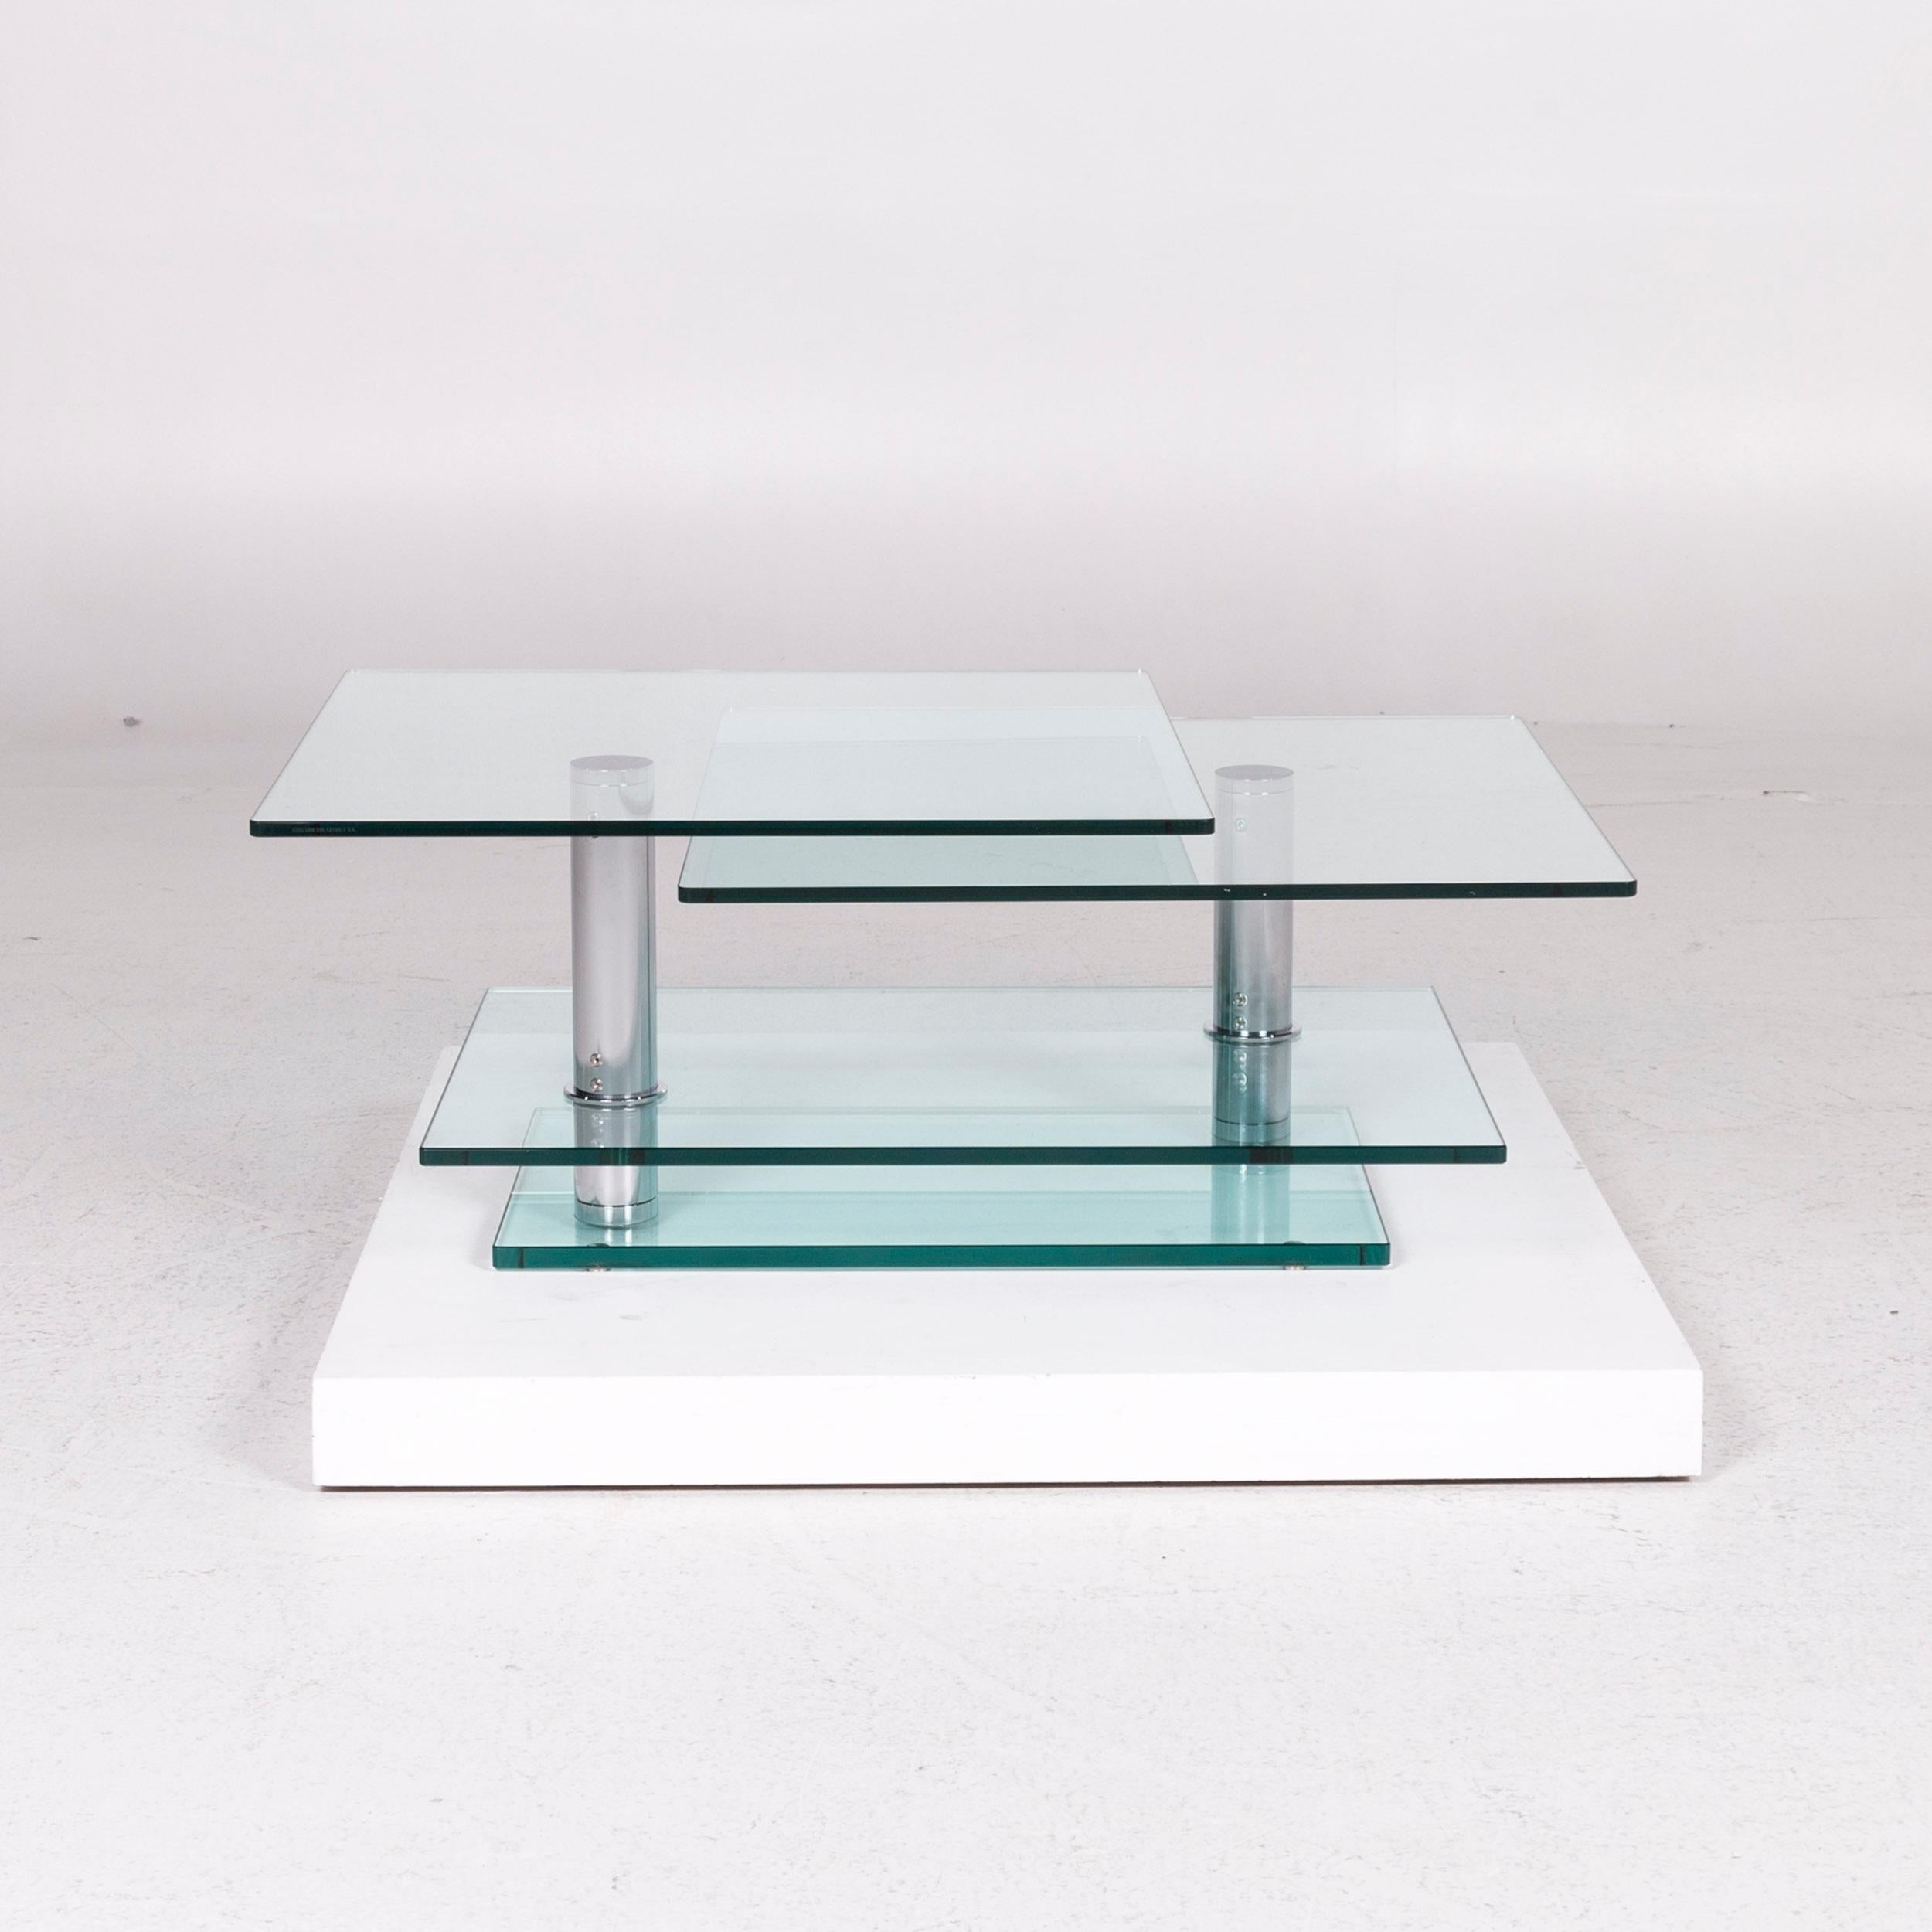 Draenert Imperial Glass Coffee Table Function Movable Table 3